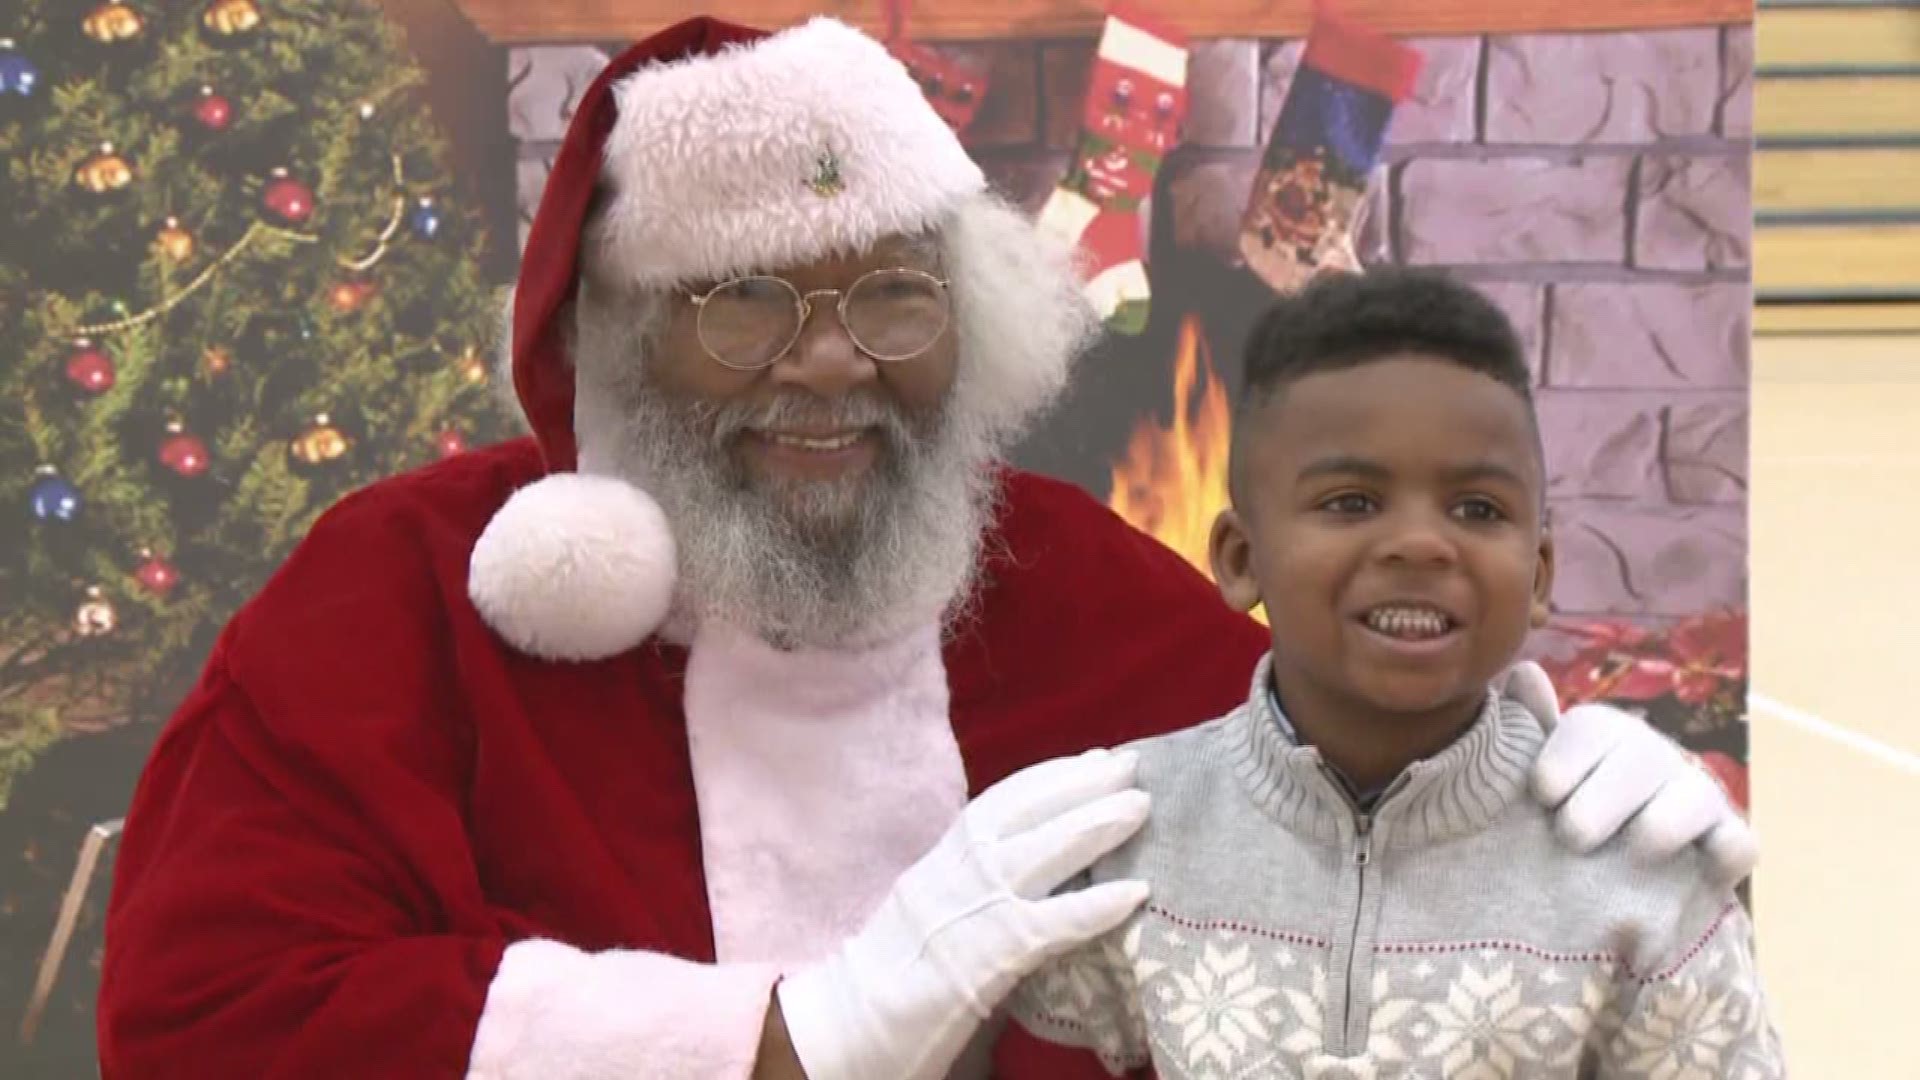 There are many different Christmas traditions families enjoy. For many in New Orleans that includes taking a picture with Chocolate Santa. Many of our viewers will instantly recognize the man we are featuring on this motivational Monday.